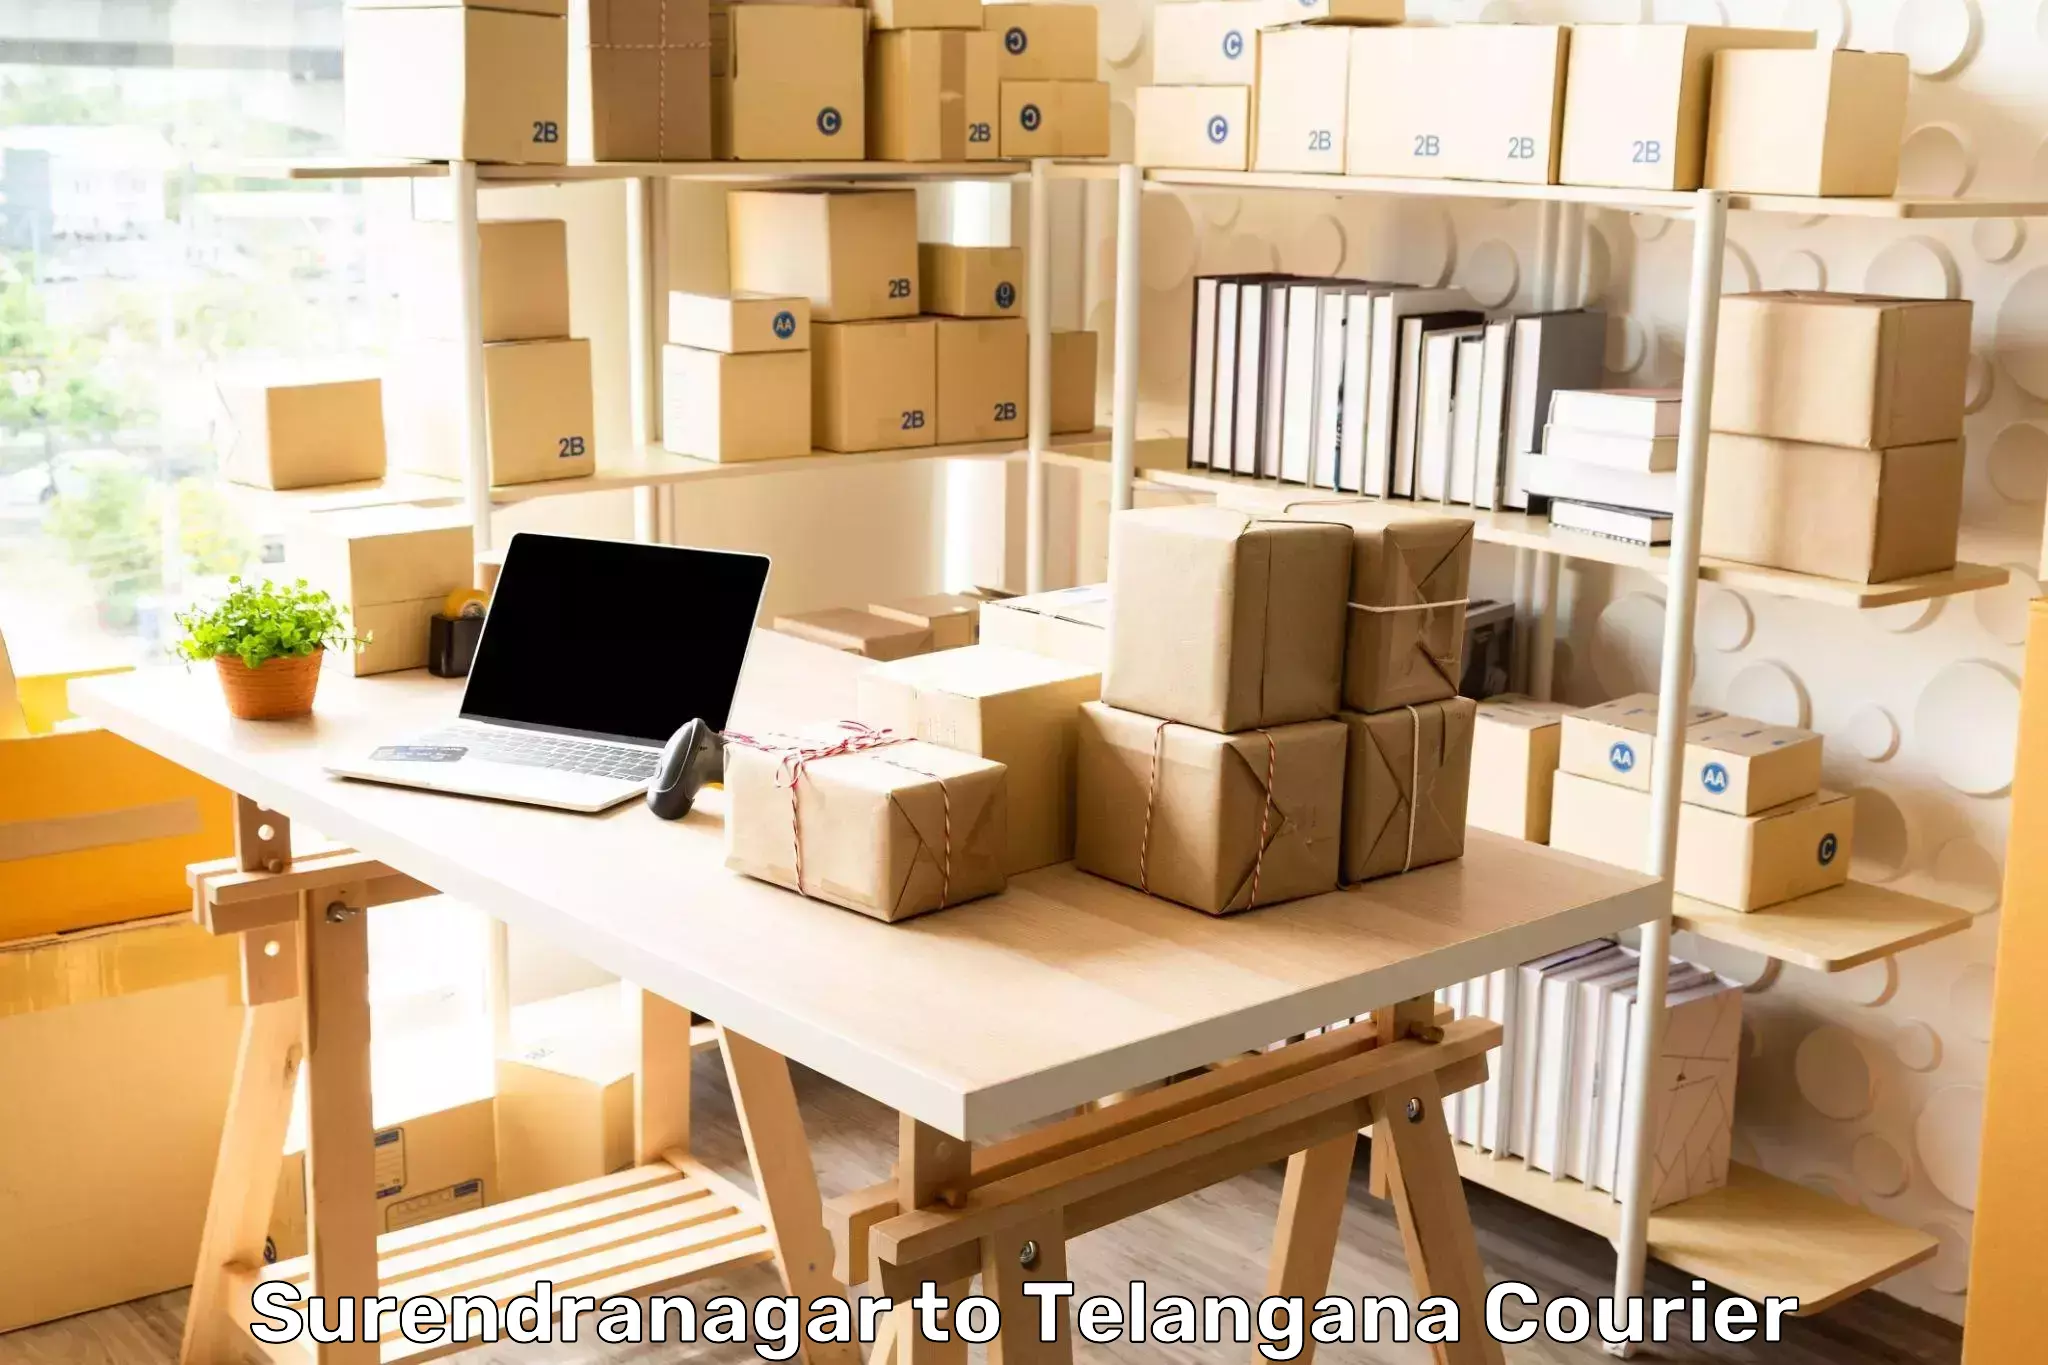 Corporate courier solutions Surendranagar to Telangana